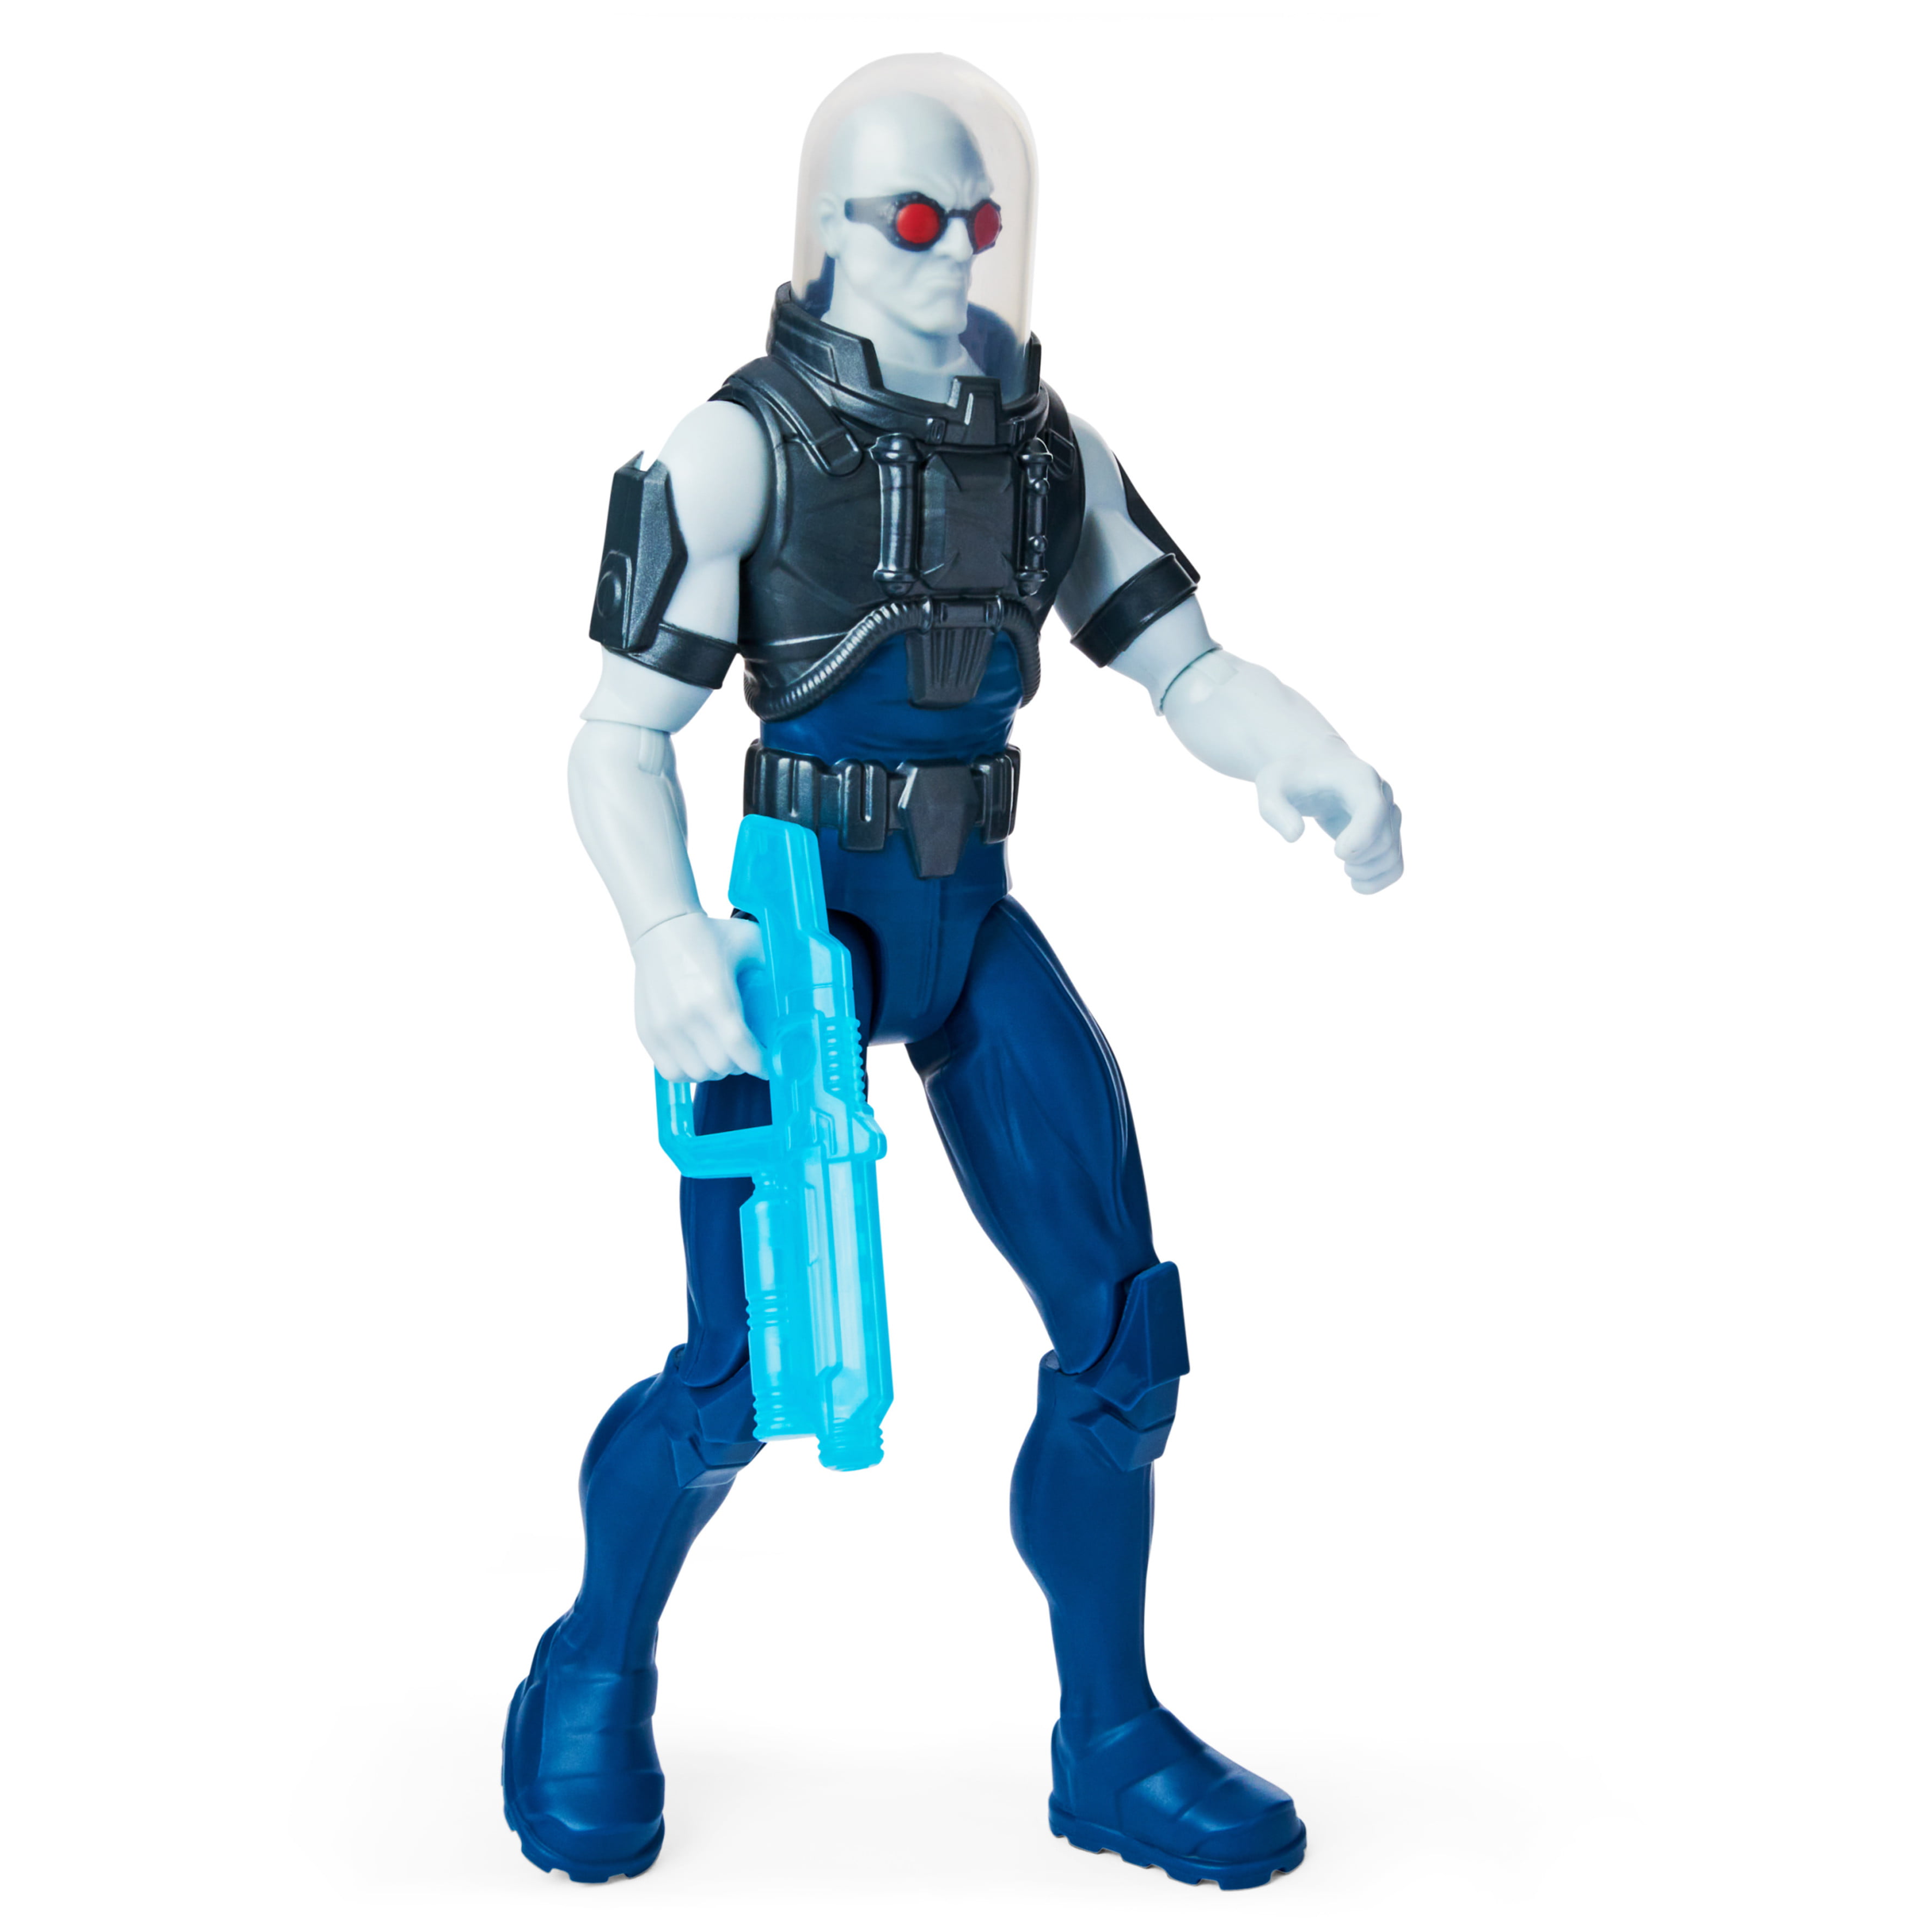 Batman 12-Inch Mr. Freeze Action Figure with Blaster Accessory, Kids Toys  for Boys Aged 3 and up